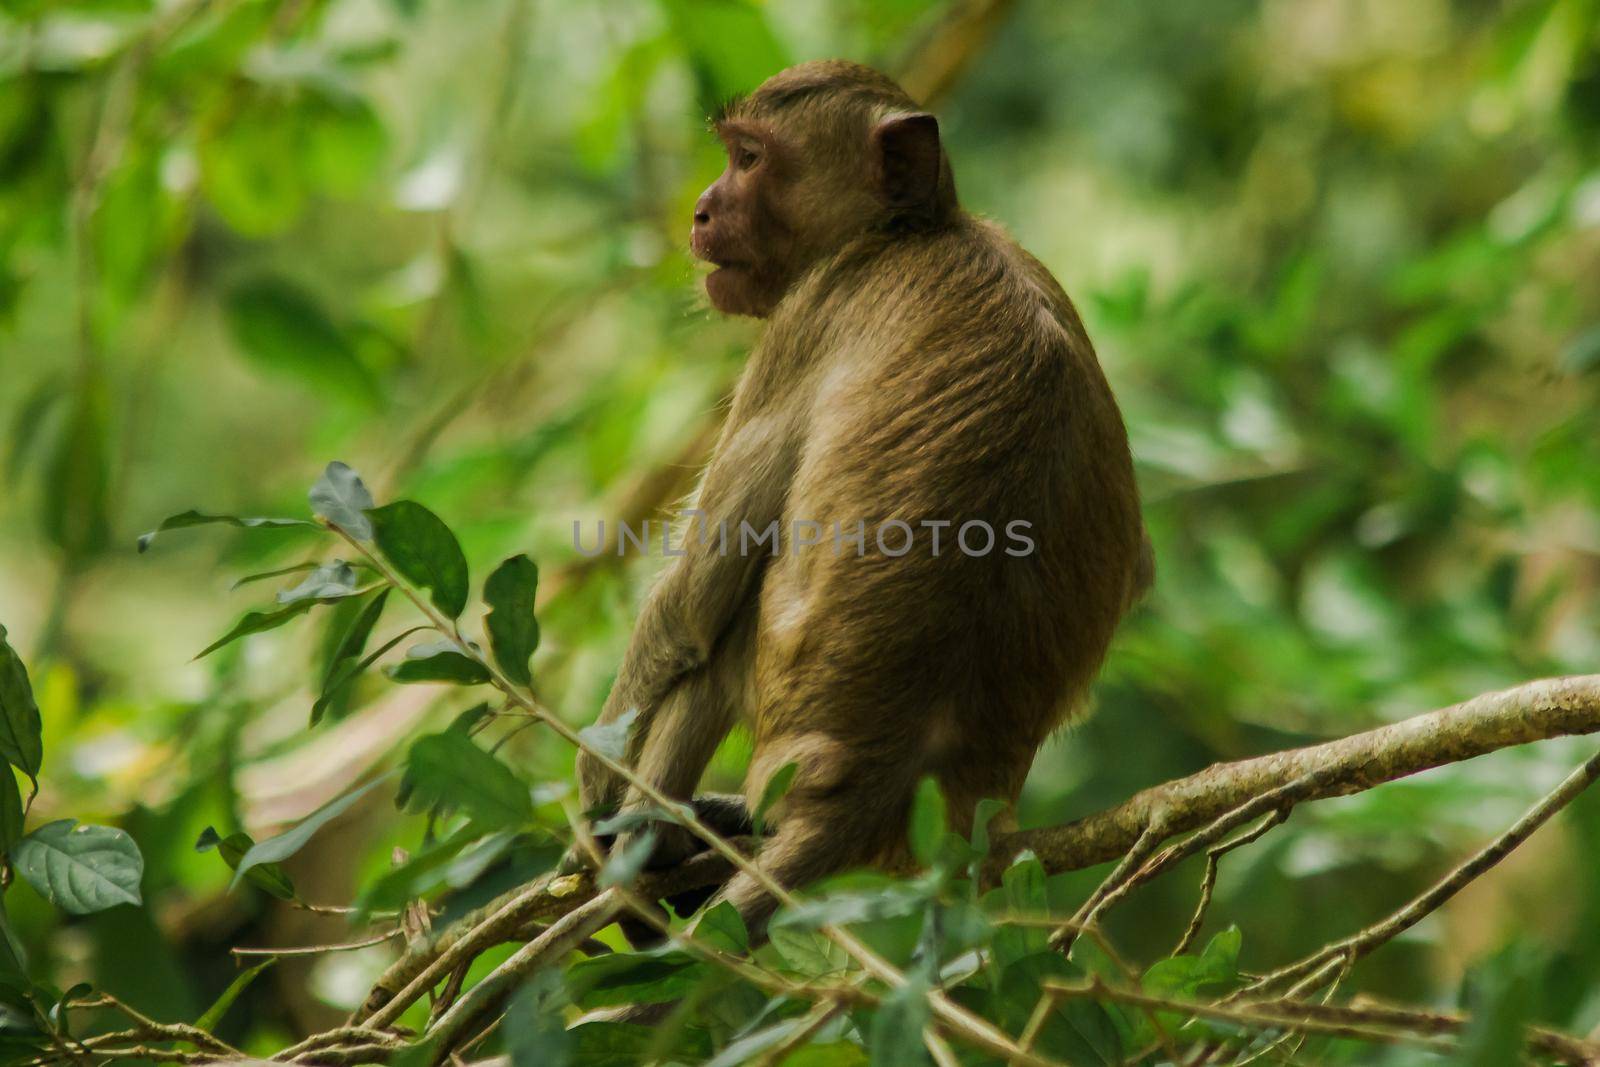 Crab-eating Macaque is sitting on a branch.
The macaque has brown hair on its body. The tail is longer than the length of the body. The hair in the middle of the head is pointed upright.